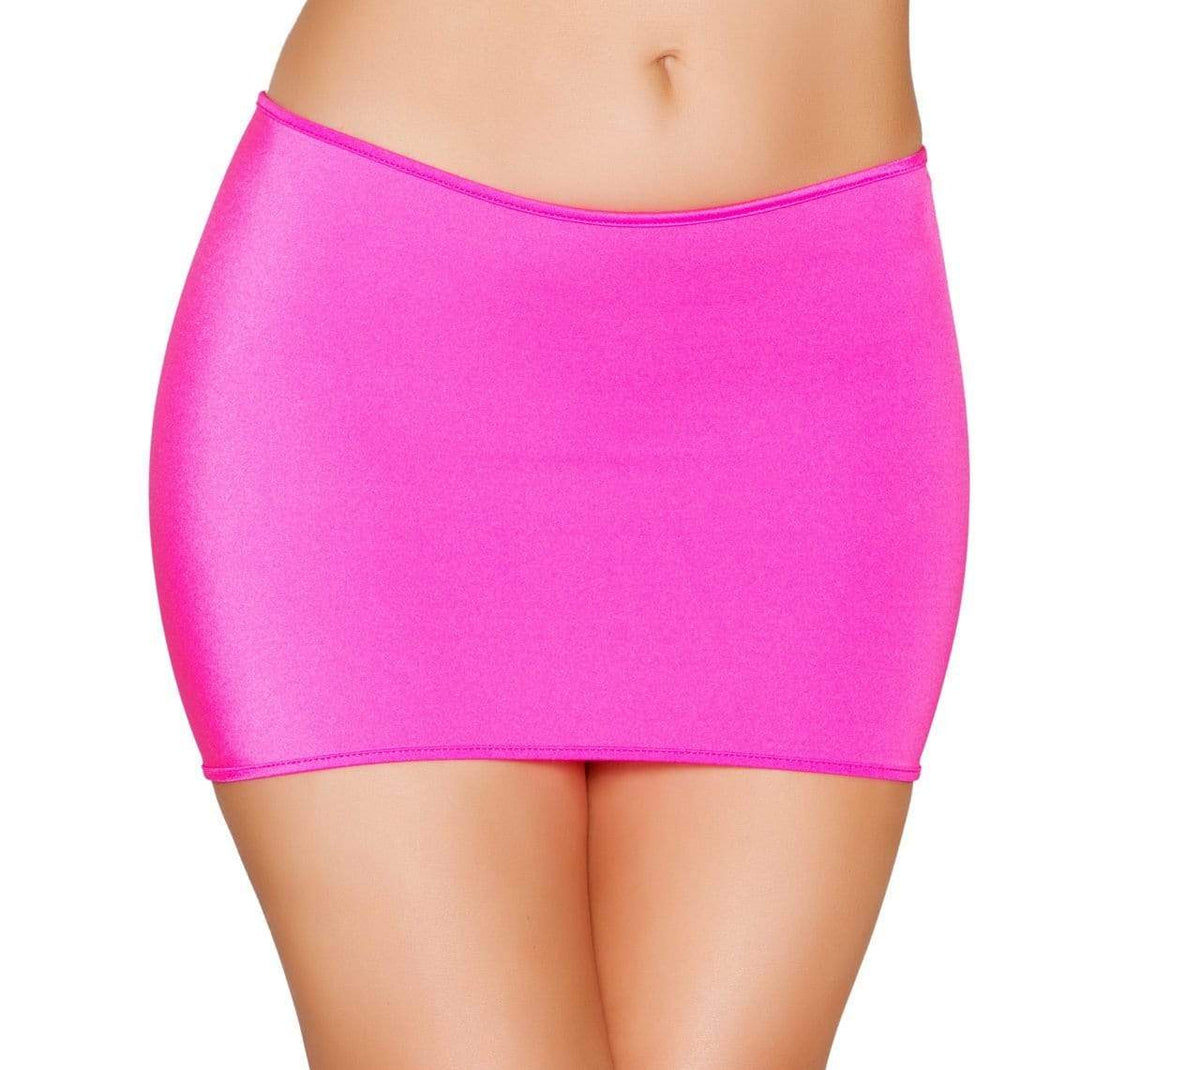 Roma One Size / Pink Black Lycra Mini Skirt (Many colors available) SHC-SK105-PINK-OS-R Lycra Mini Skirt Festival Dance Rave Roma SK105 Apparel &amp; Accessories &gt; Clothing &gt; Skirts